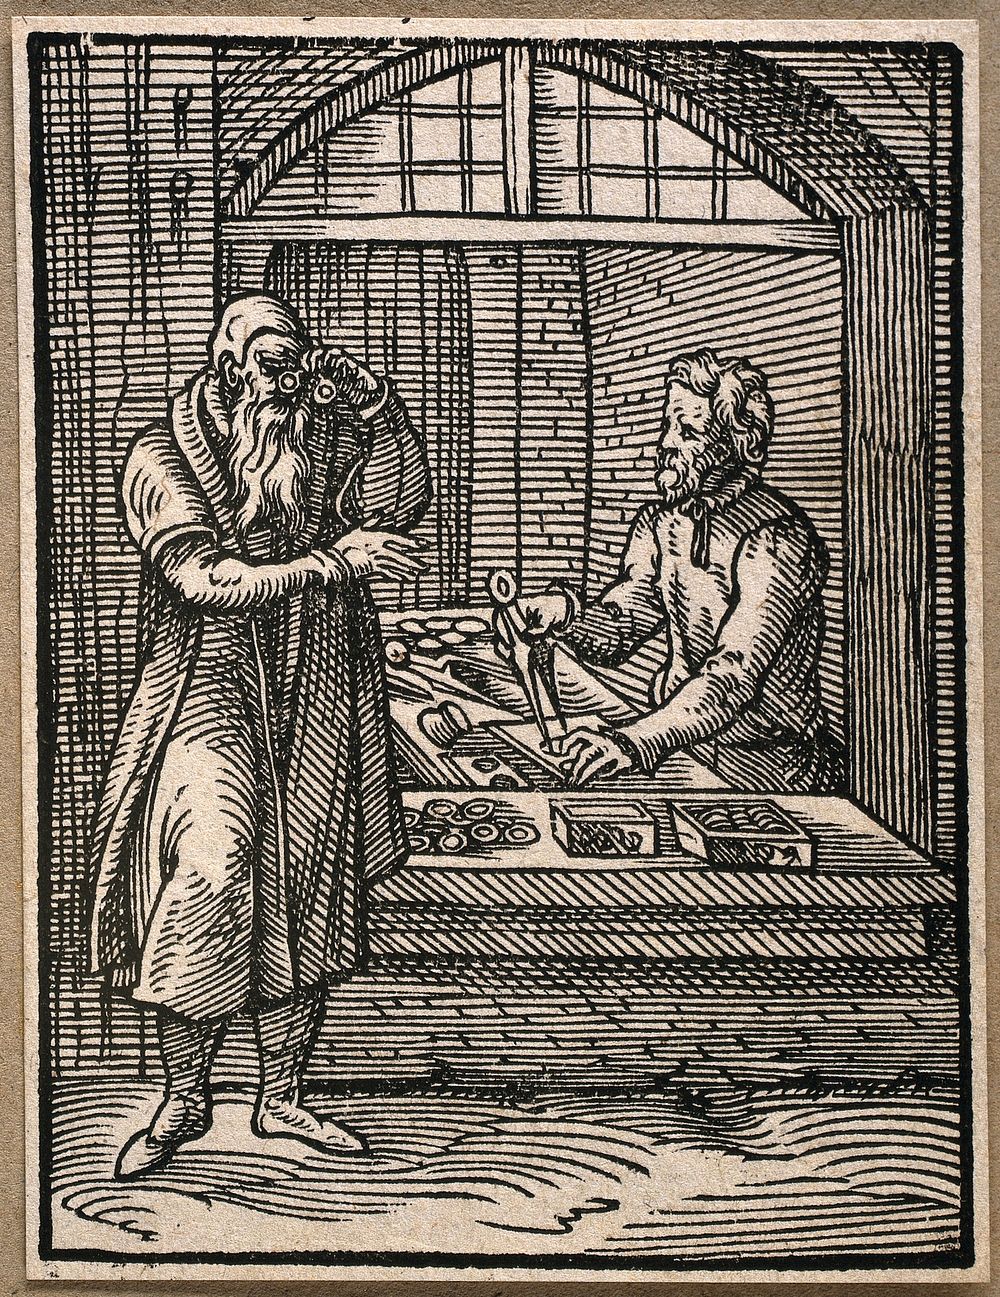 An old man trying on spectacles at a street vendor's optical shop. Woodcut by J. Amman, 1568.